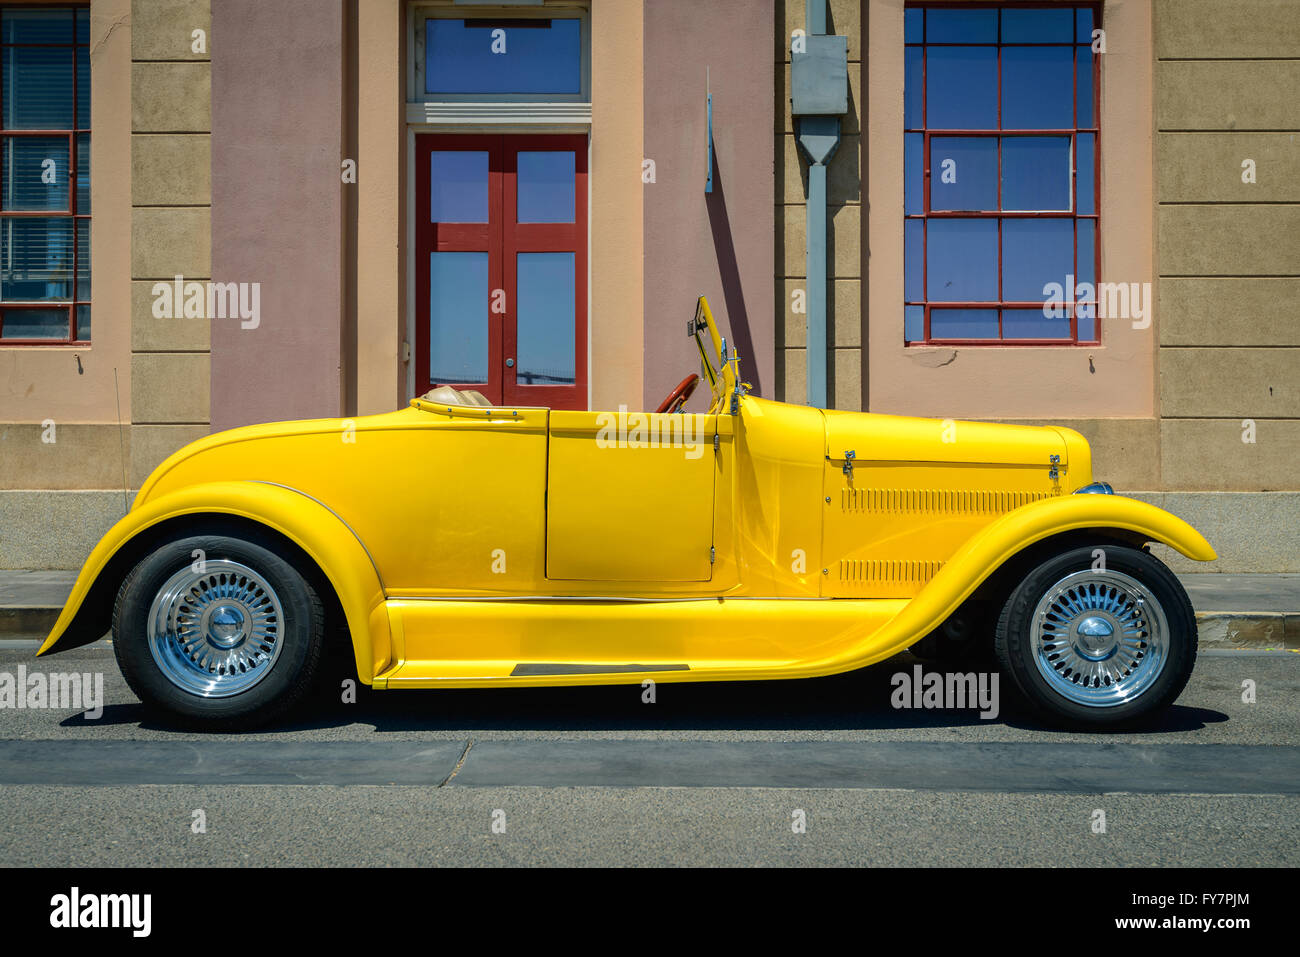 Adelaide, Australia - February 9, 2014: Yellow custom hot rod parked on the street on a bright day Stock Photo